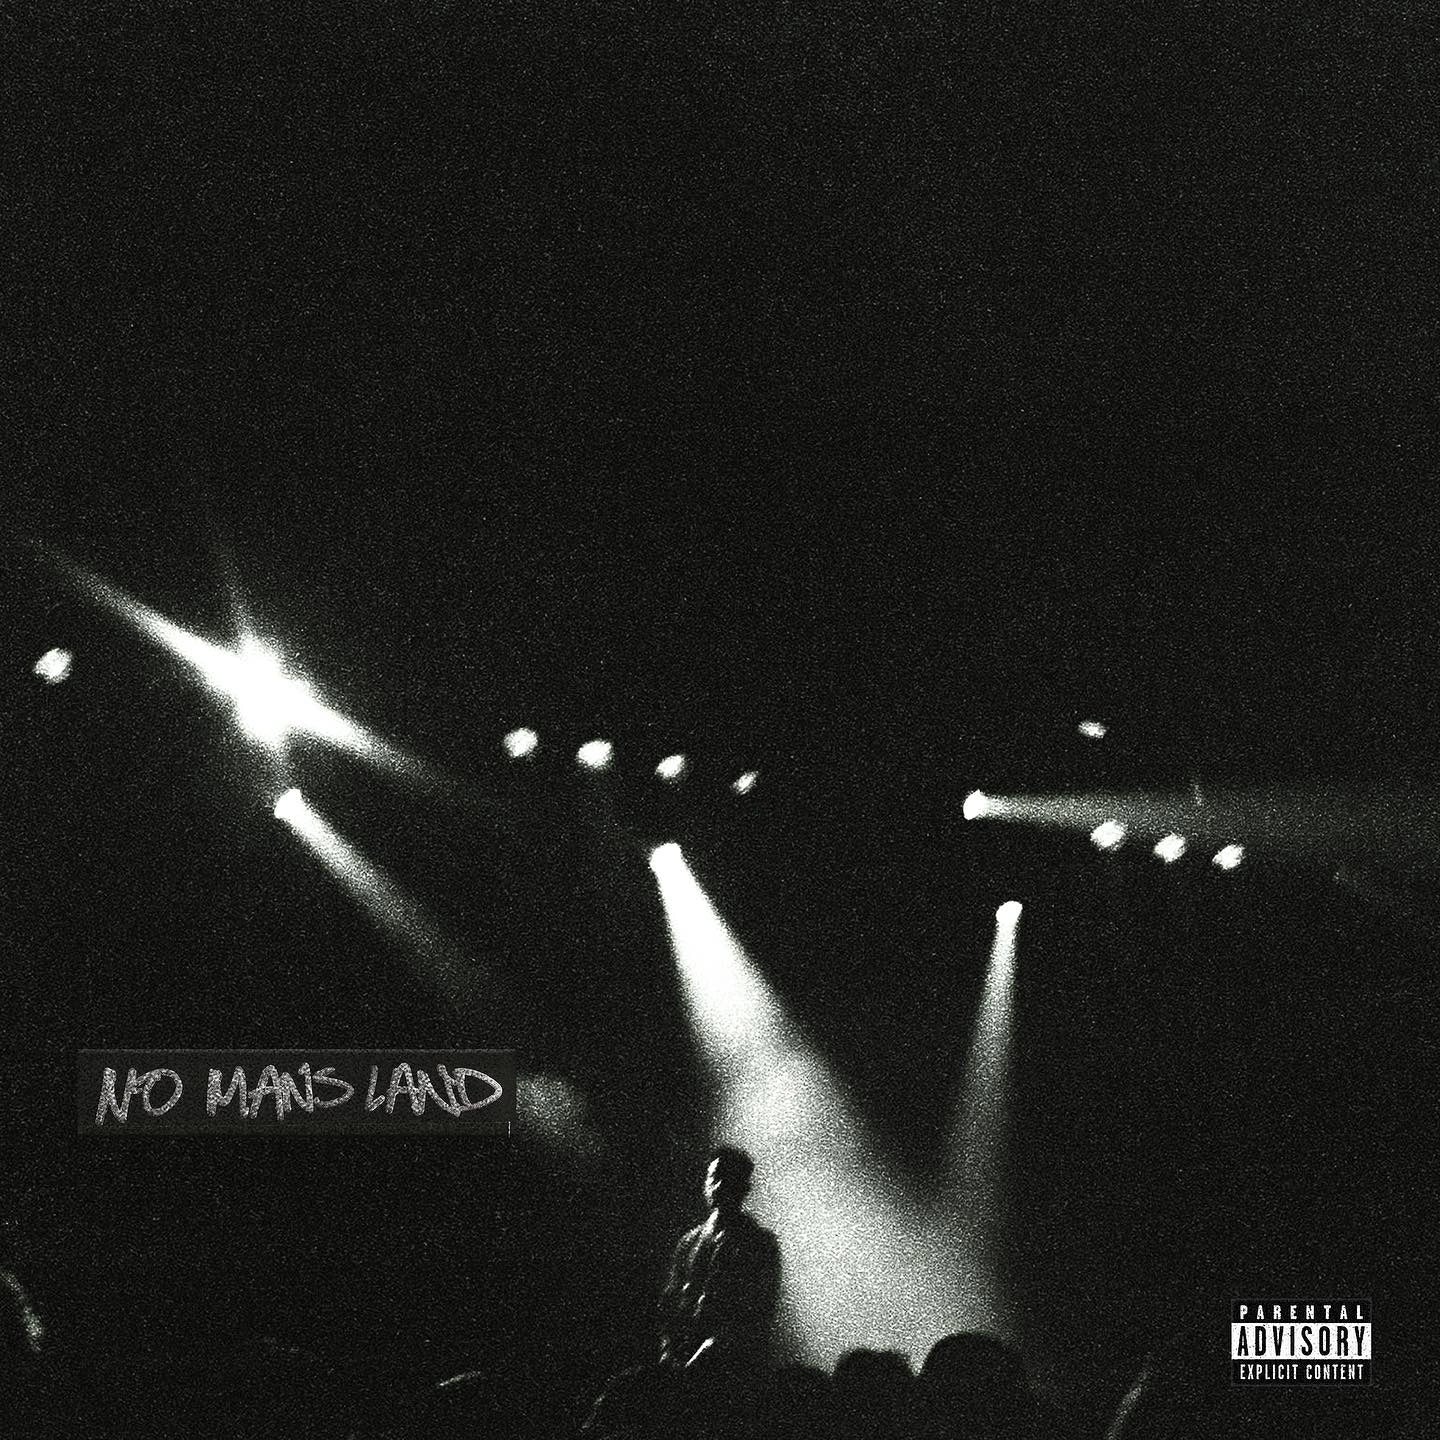 Cover art for the EP "No Mans Land" by Lithe, released in 2023. The image features a dark stage with spotlights and a shadowy figure, reflecting the artist's mysterious and ethereal aesthetic. The EP includes 6 songs.